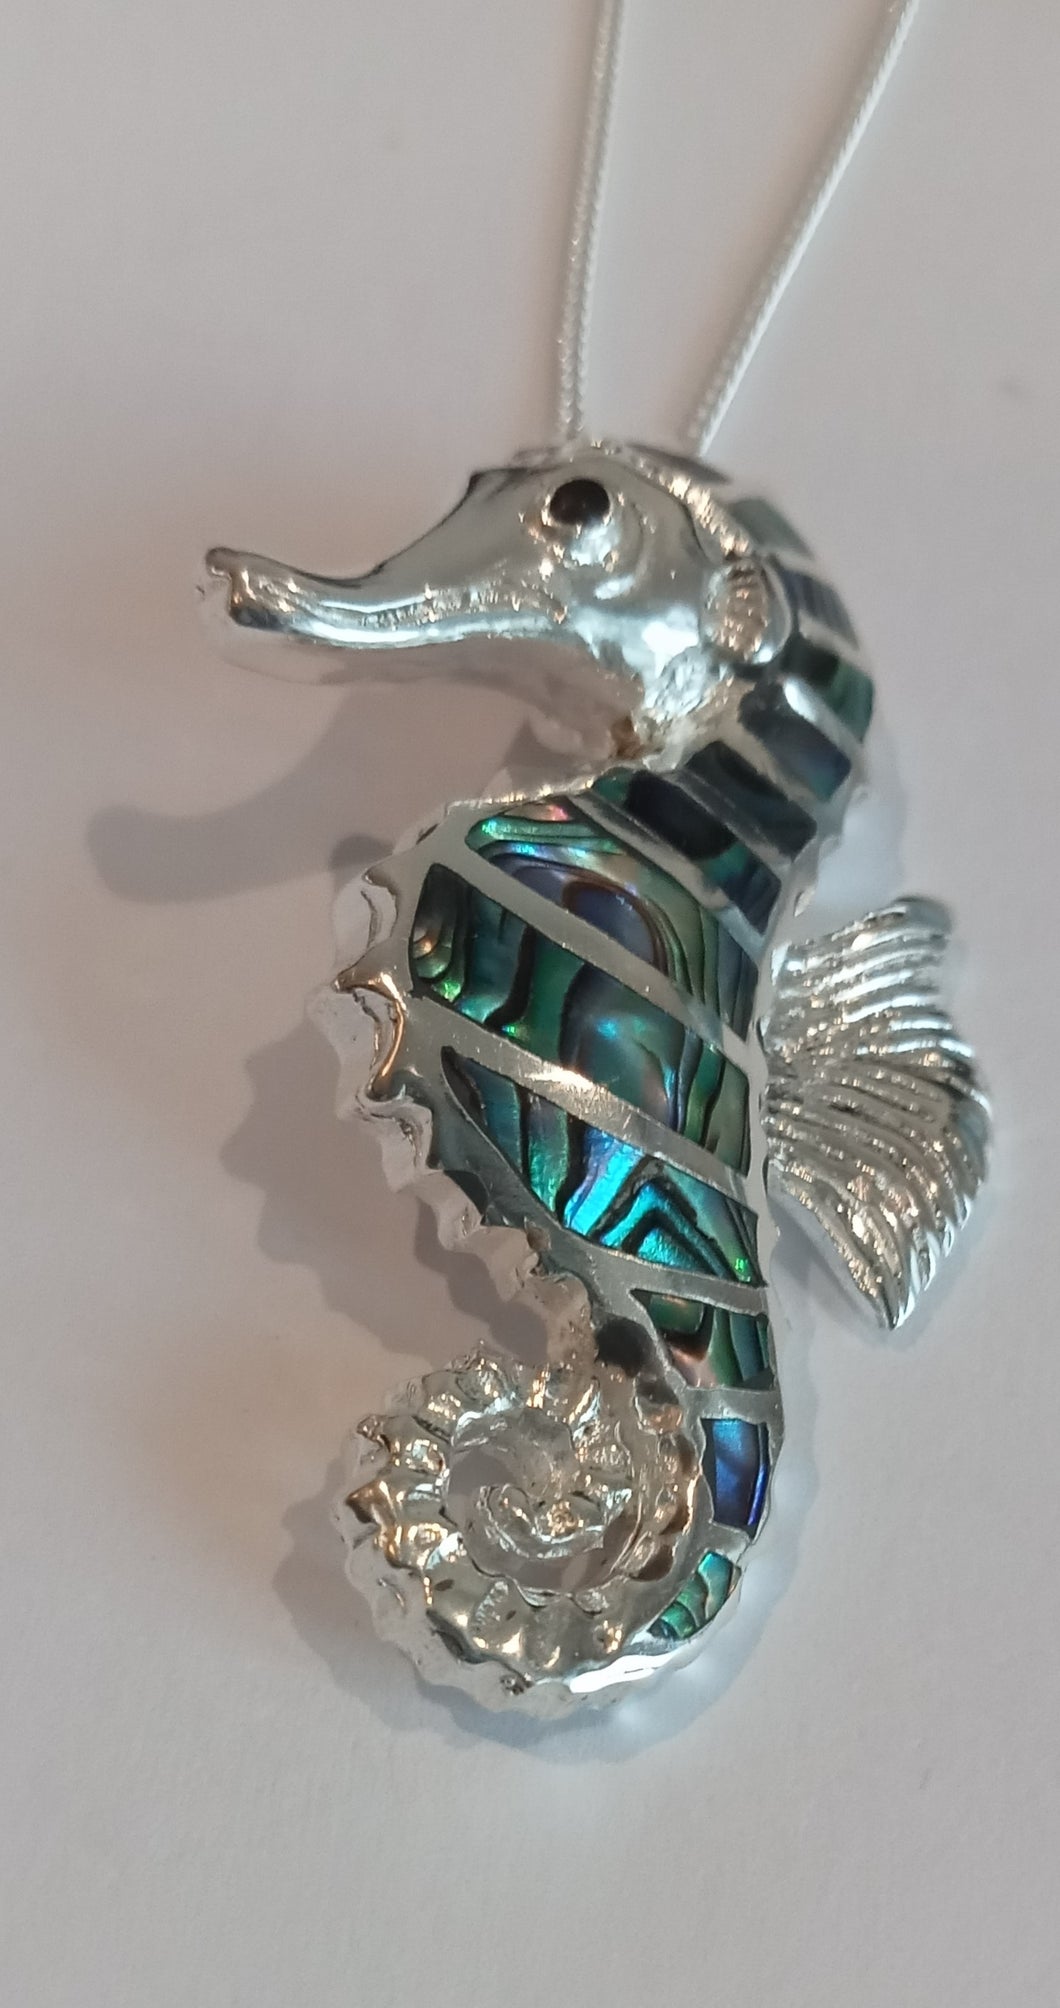 Small Seahorse of abalone shell and silver pendant